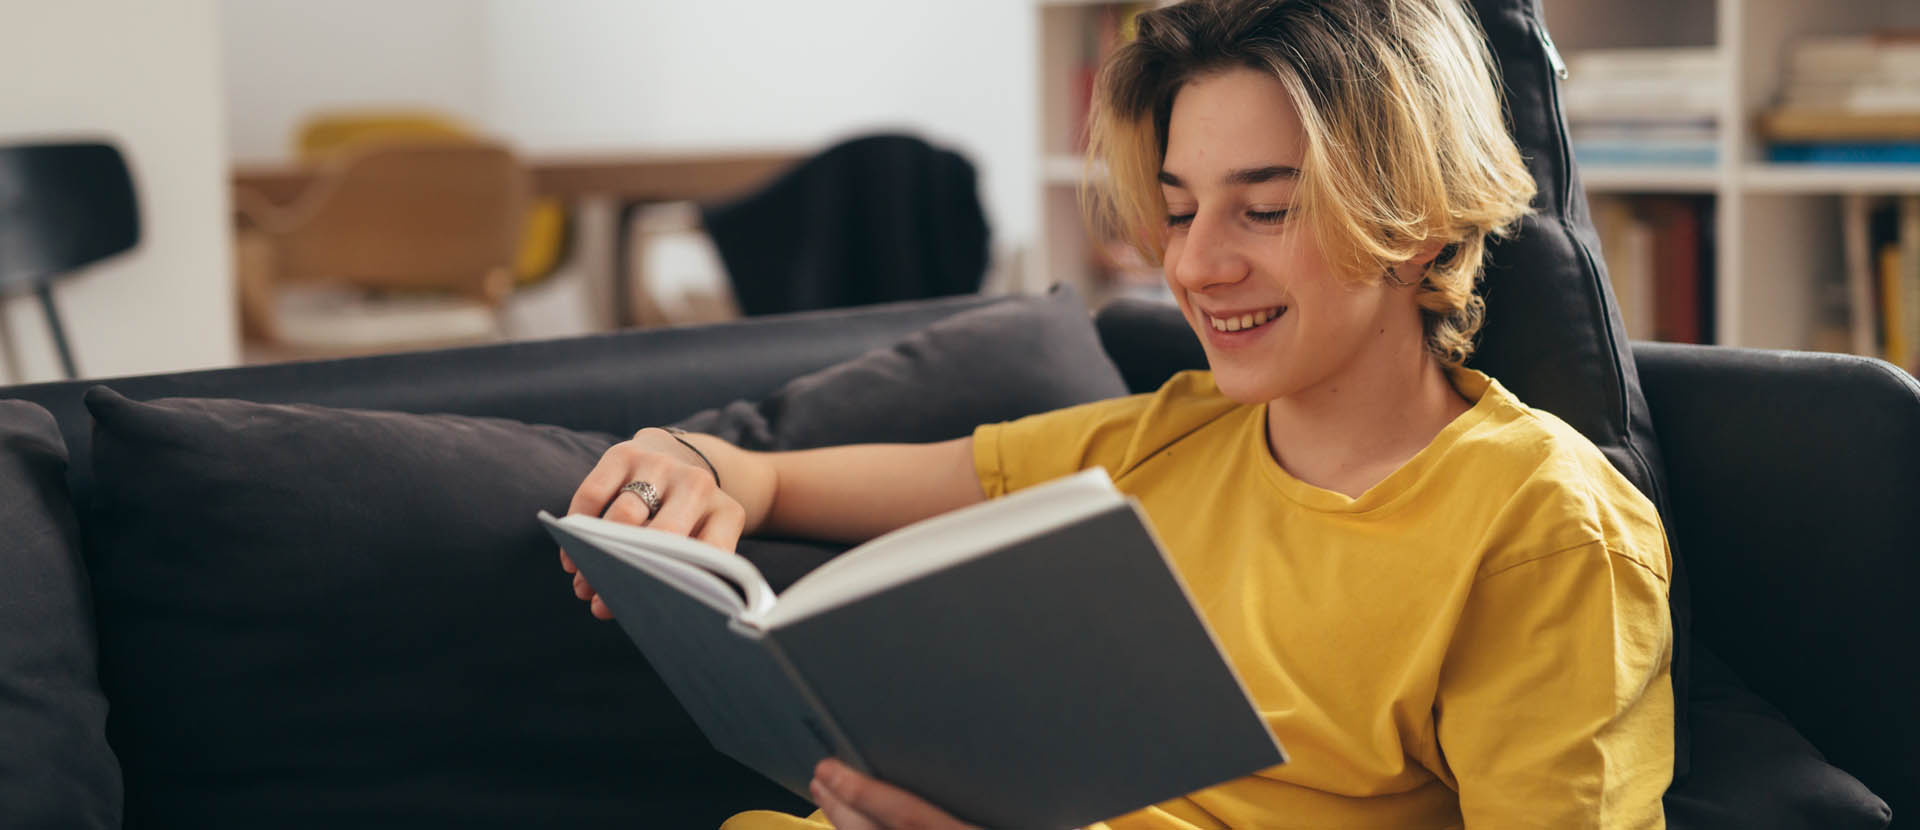 Top 5 Summer Reads for Teens